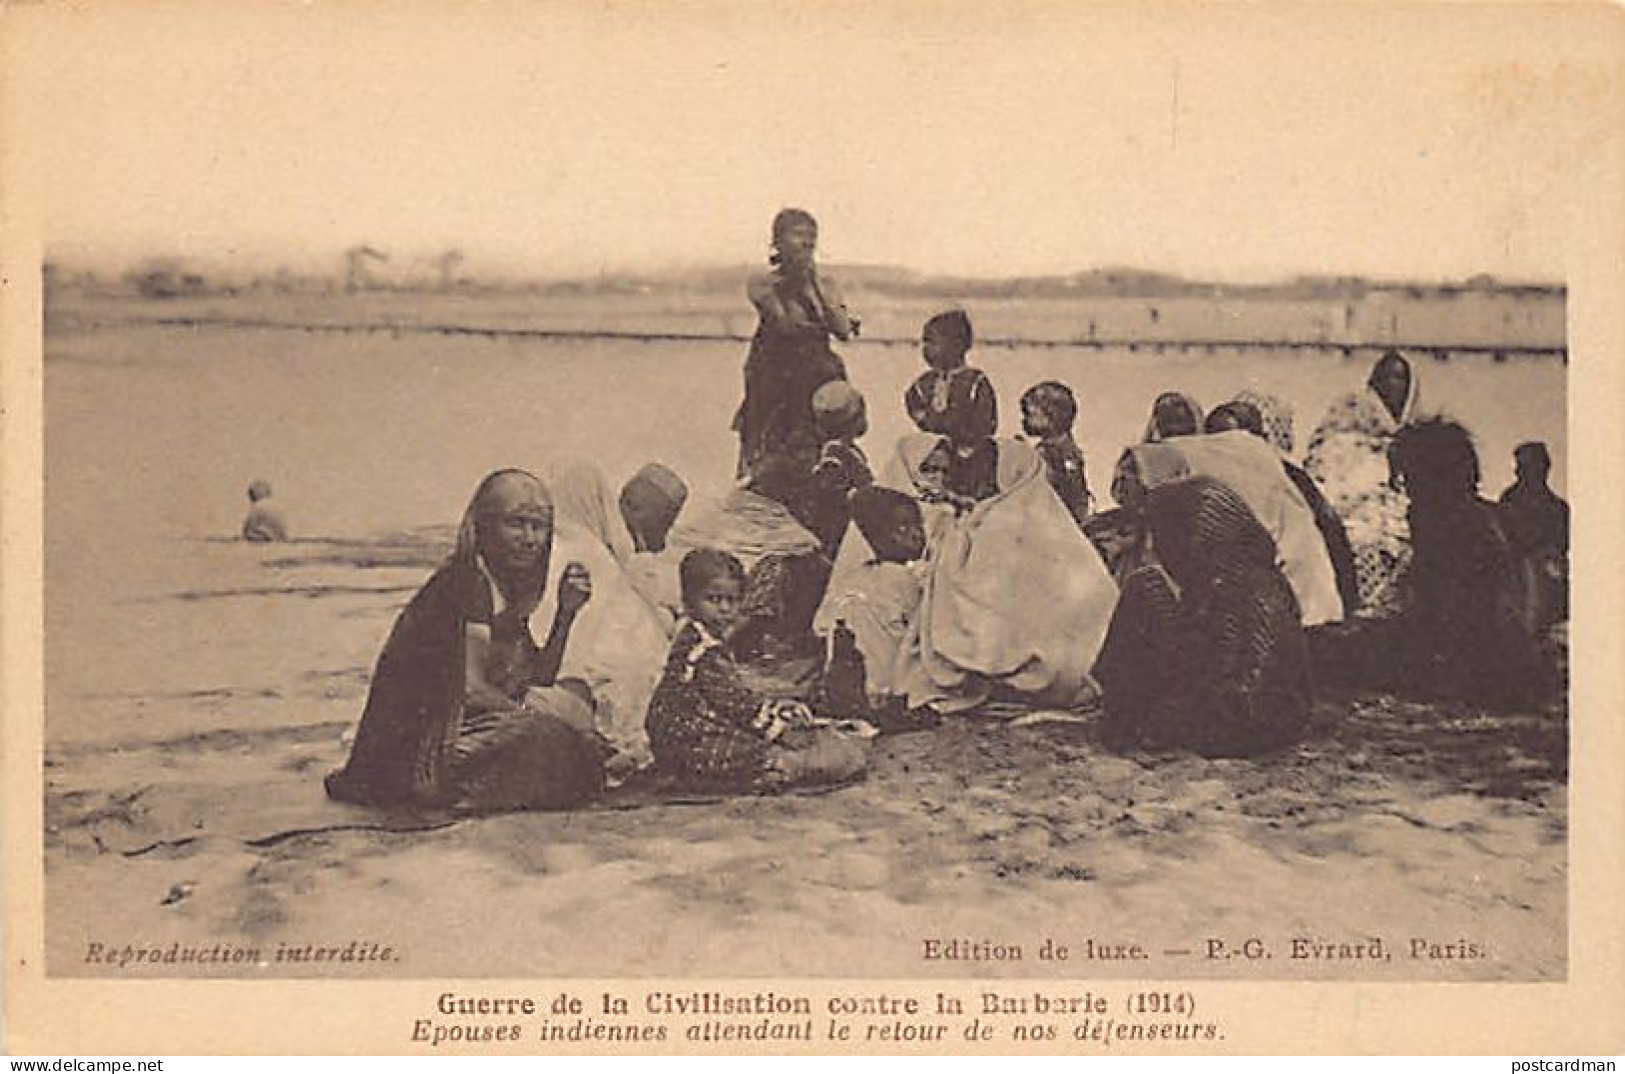 India - War Of Civilization Against Barbarism (1914) - Indian Wives Of Soldiers Awaiting The Return Of Our Defenders - India